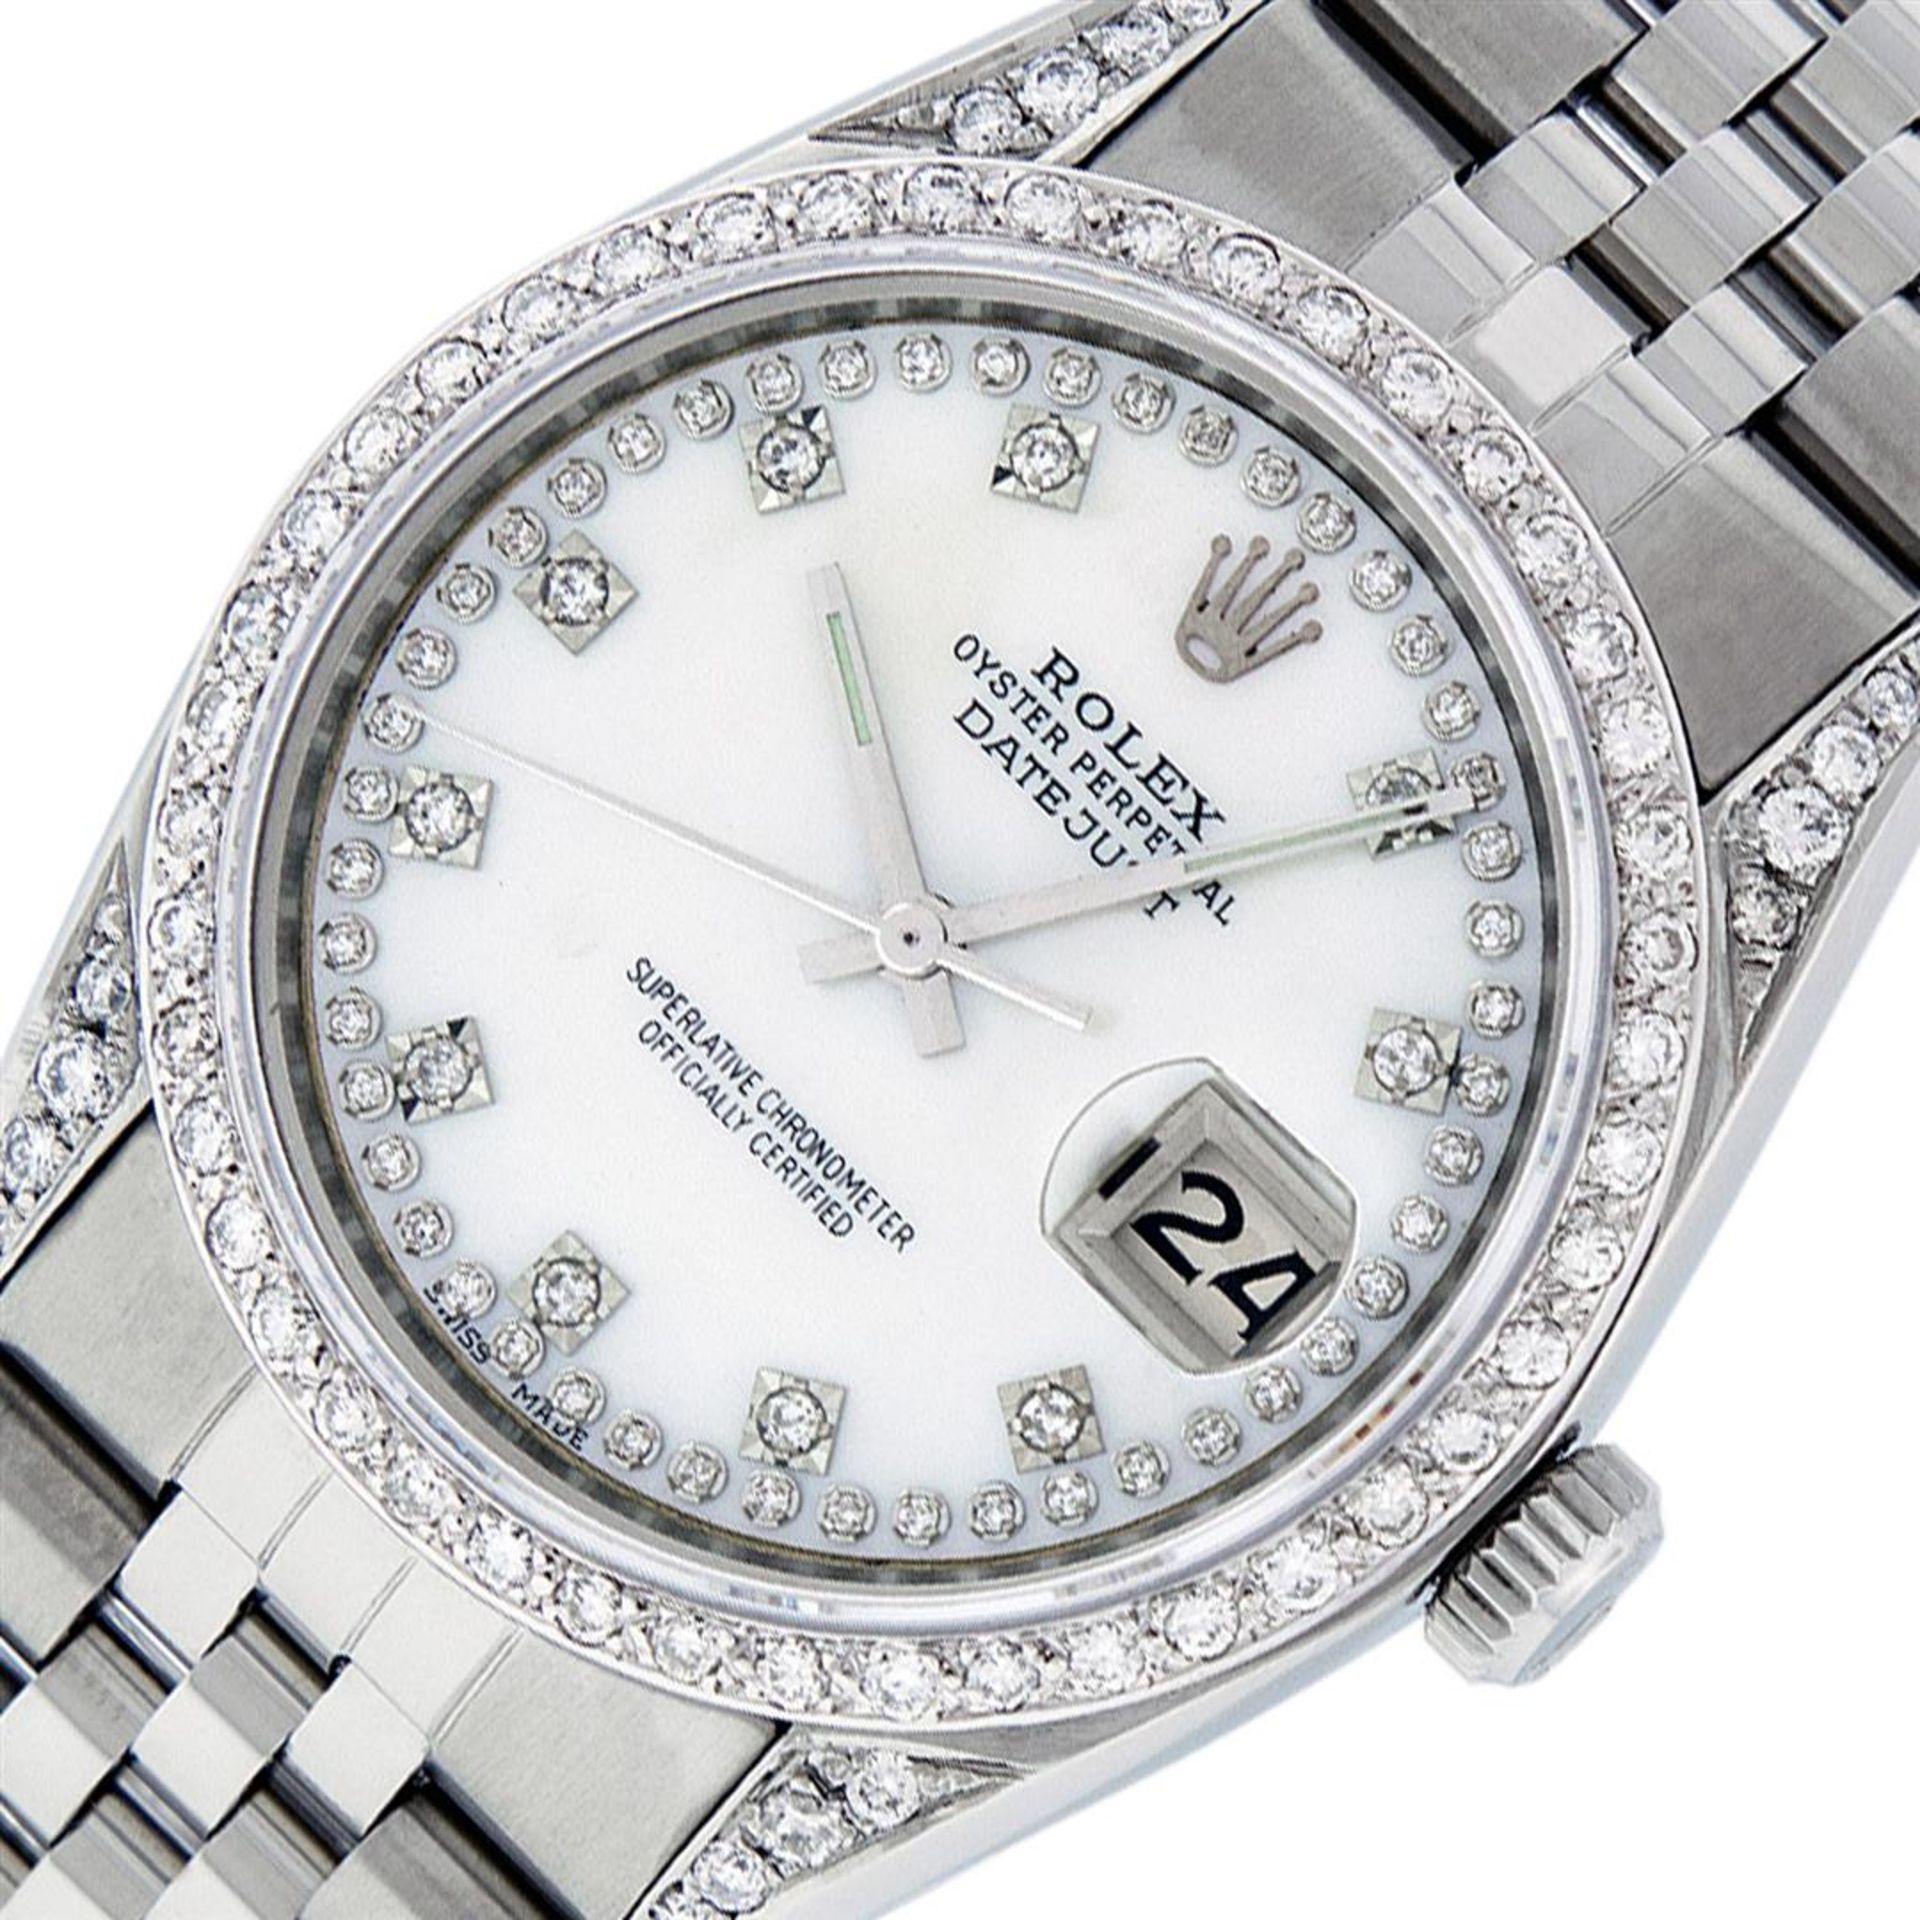 Rolex Mens Stainless Steel Mother Of Pearl Diamond Lugs Datejust Wristwatch - Image 2 of 9